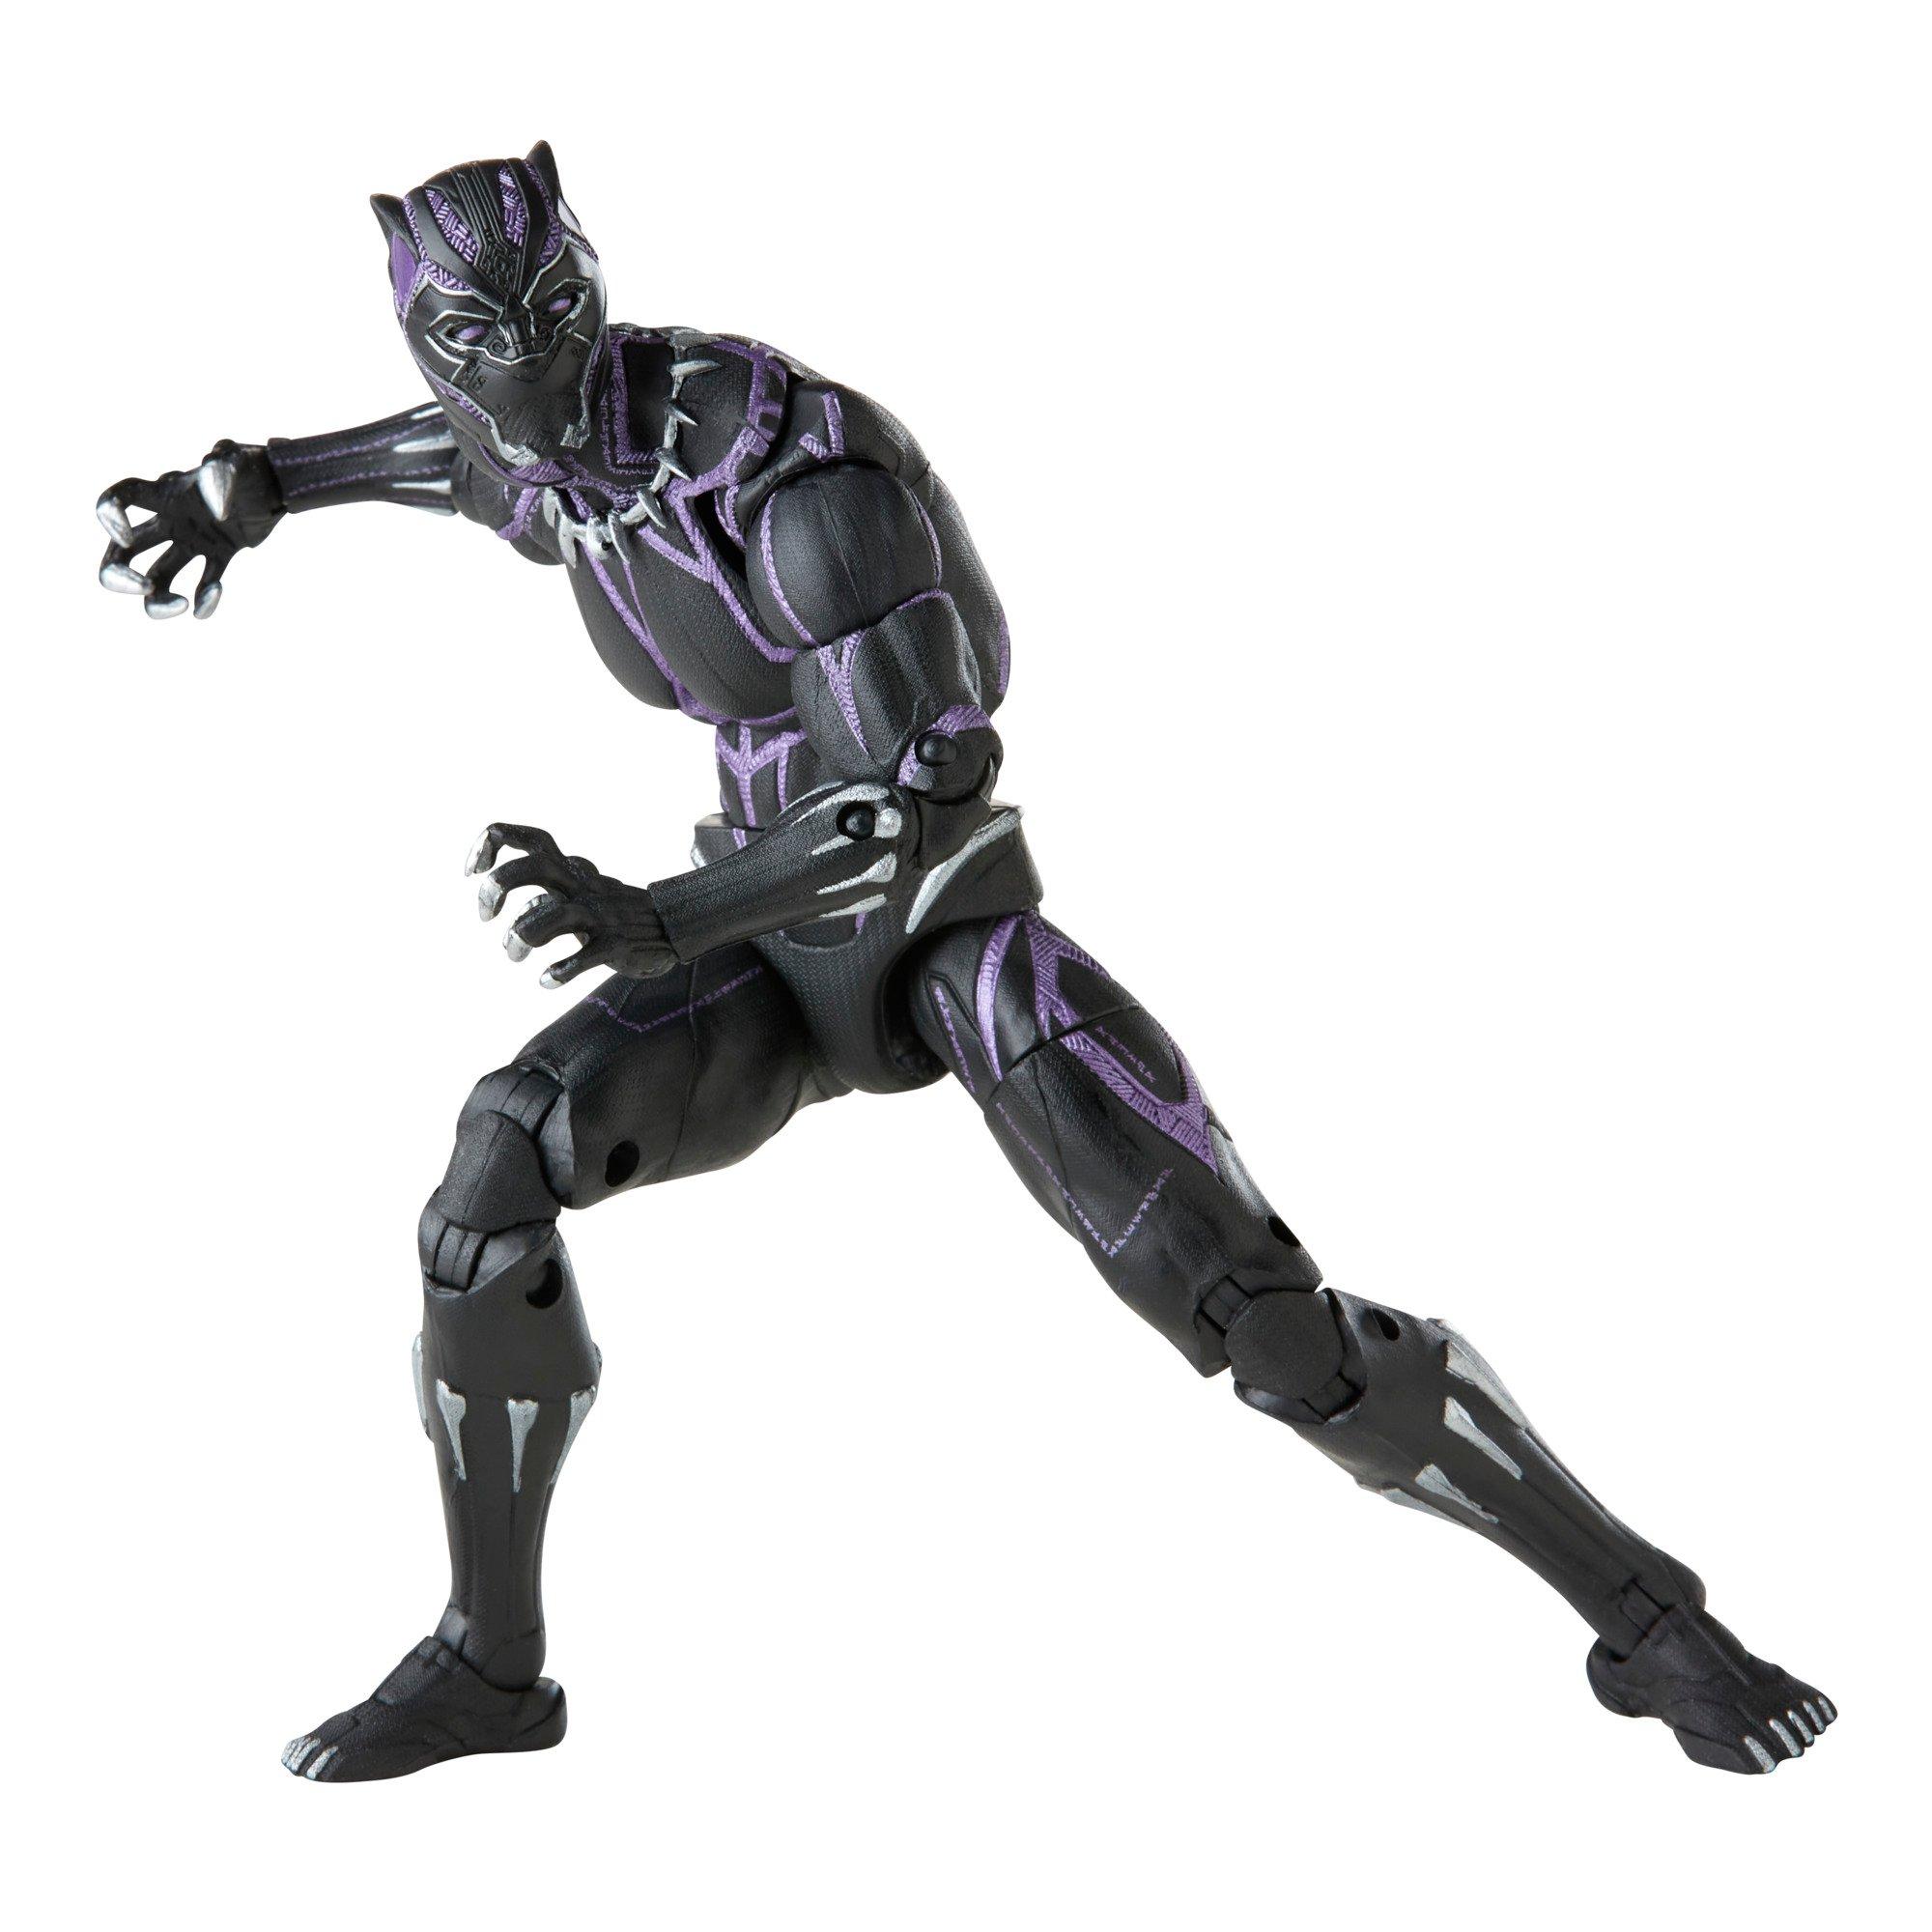 Hasbro Marvel Studios Legend Series Black Panther Legacy Collection Black Panther 6-in Action Figure